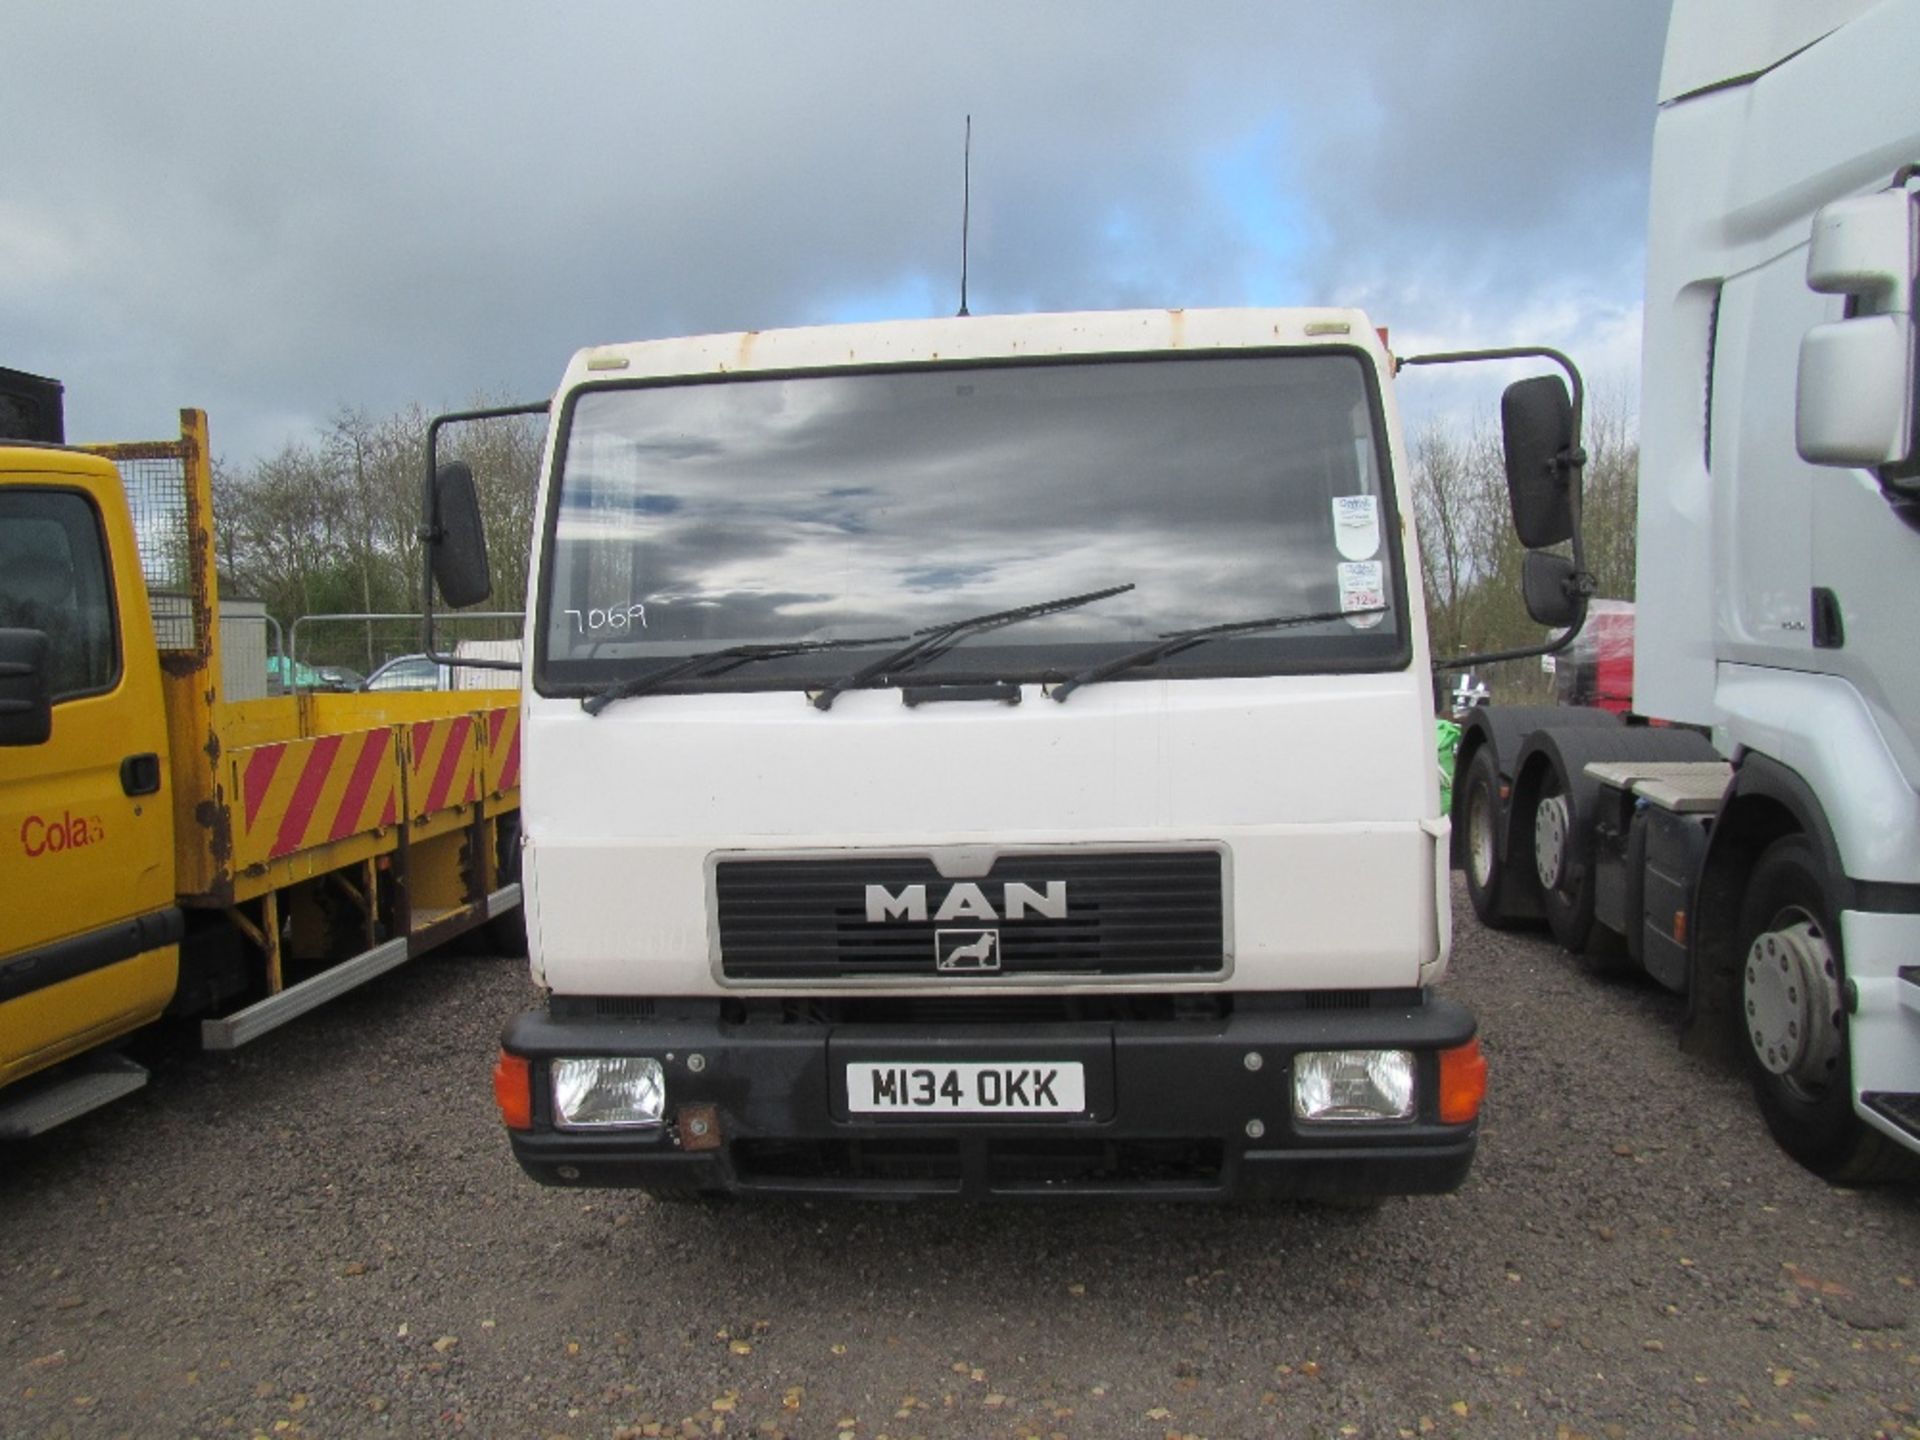 1994 Man 7.5 Ton Flat bed c/w New Floor Fitted. Reg Docs will be supplied. Reg. No. M134 OKK - Image 2 of 7